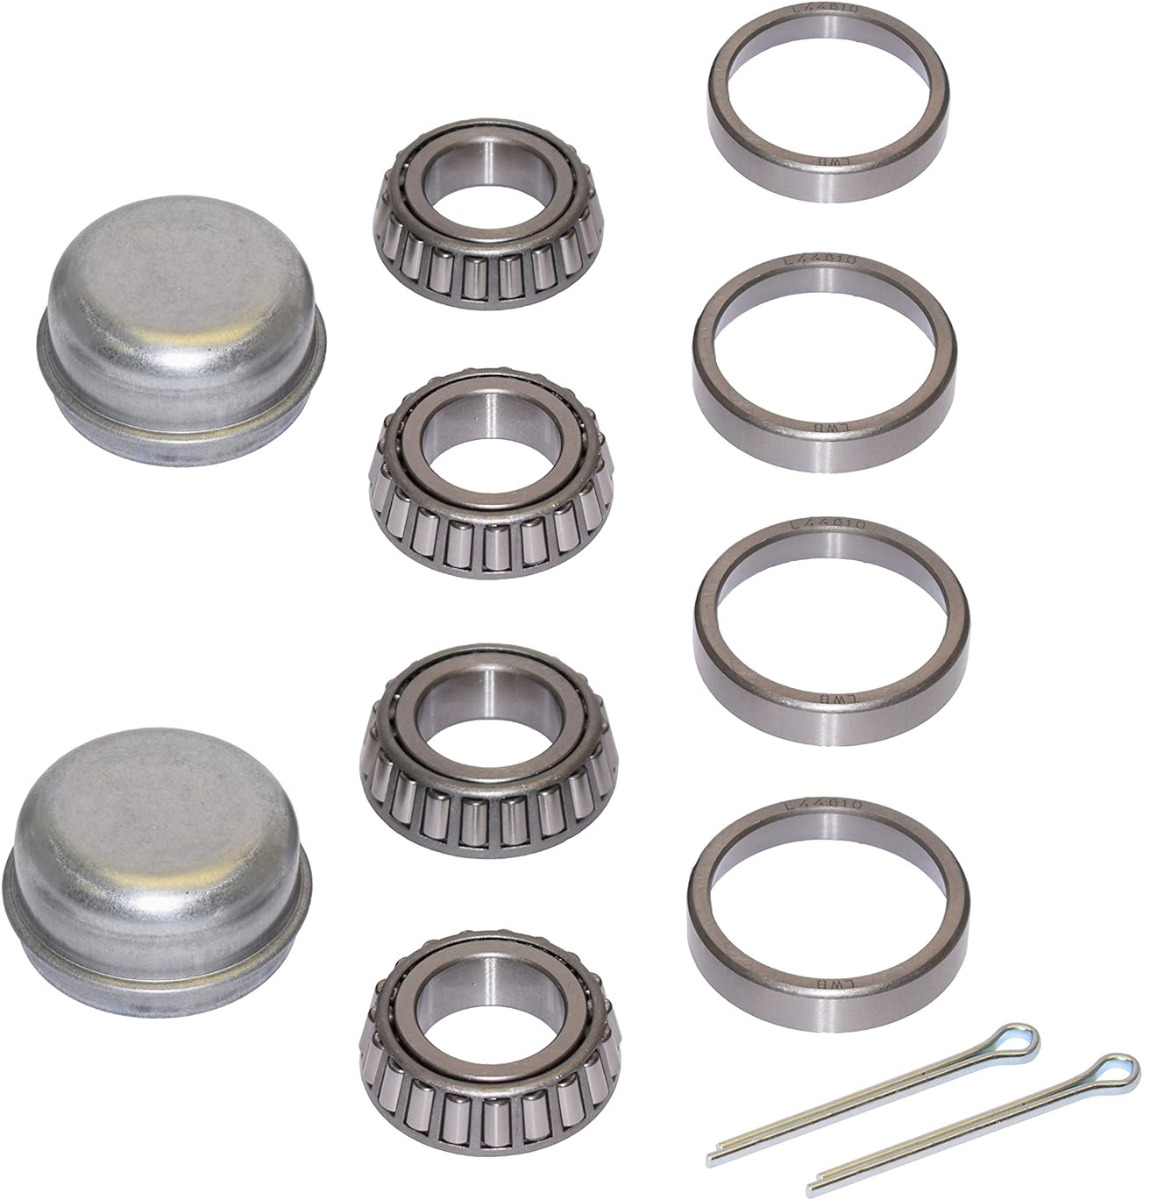 Pair Of Trailer Bearing Repair Kits For 1-1/16 Inch Straight Spindles - 2 Sets